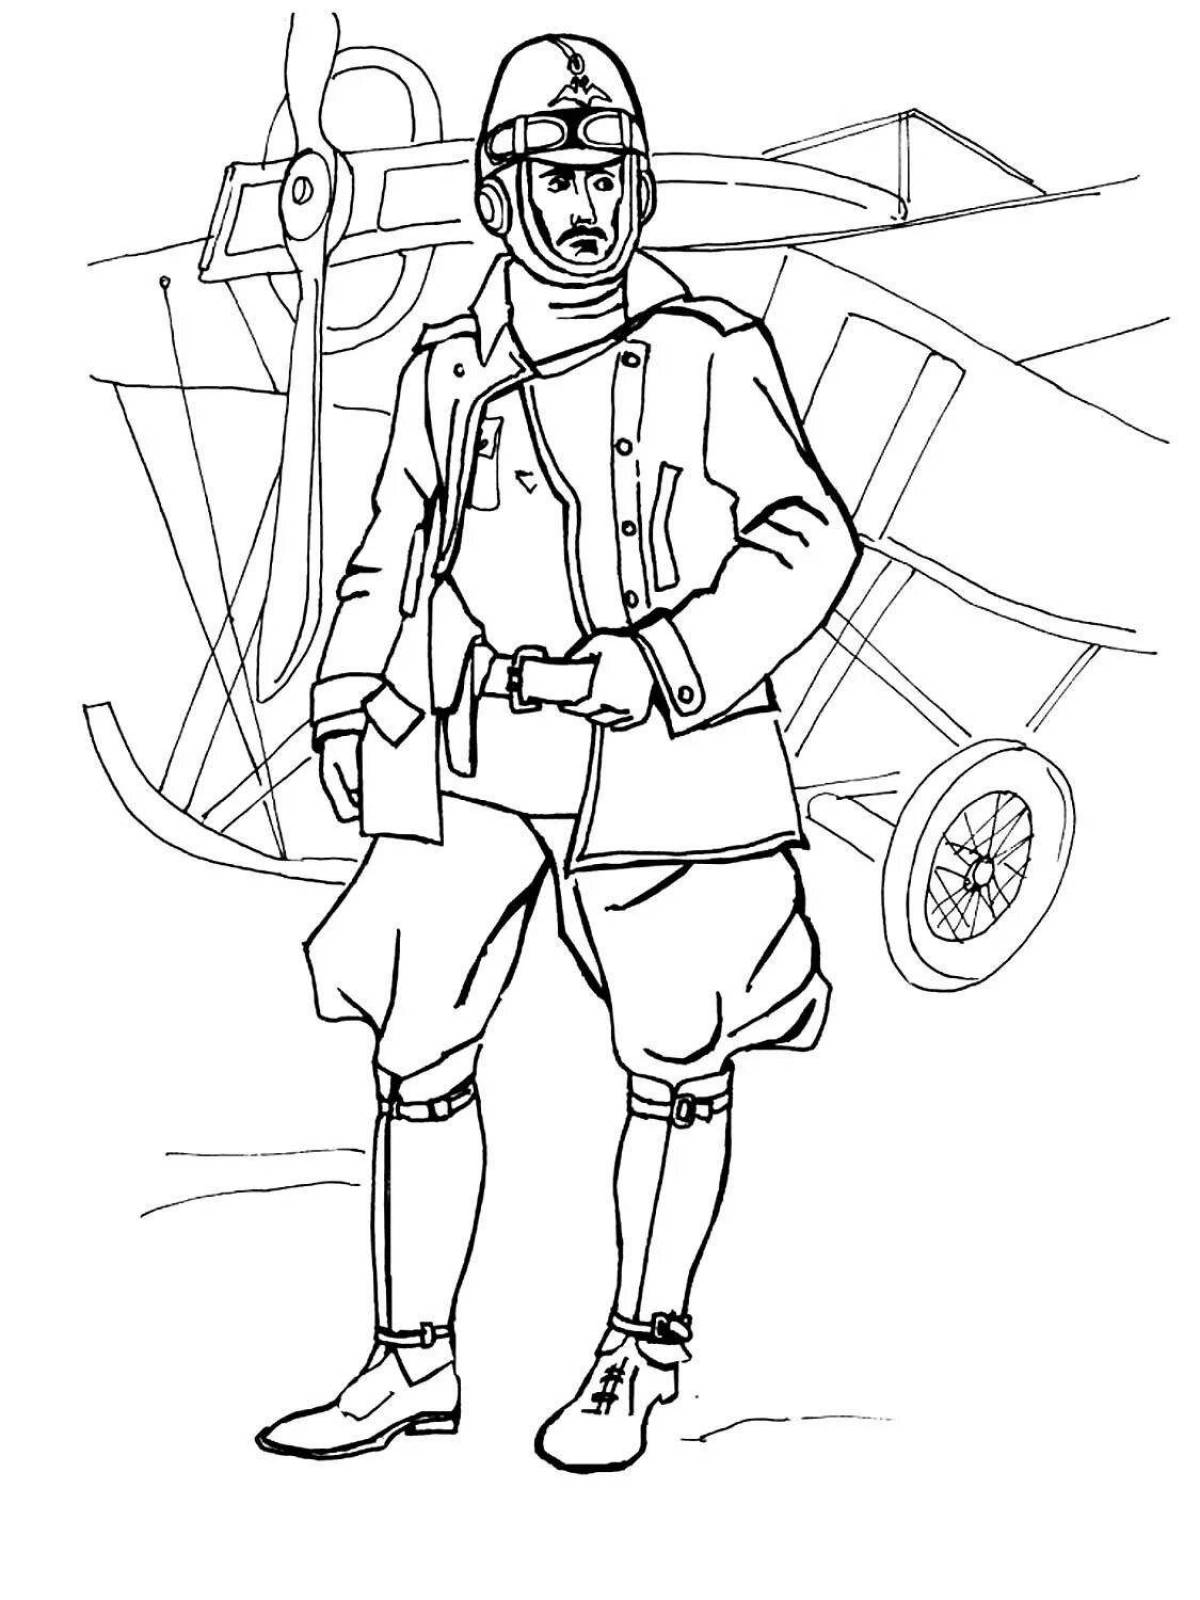 Luxury coloring pages soldiers of different branches of the military for children